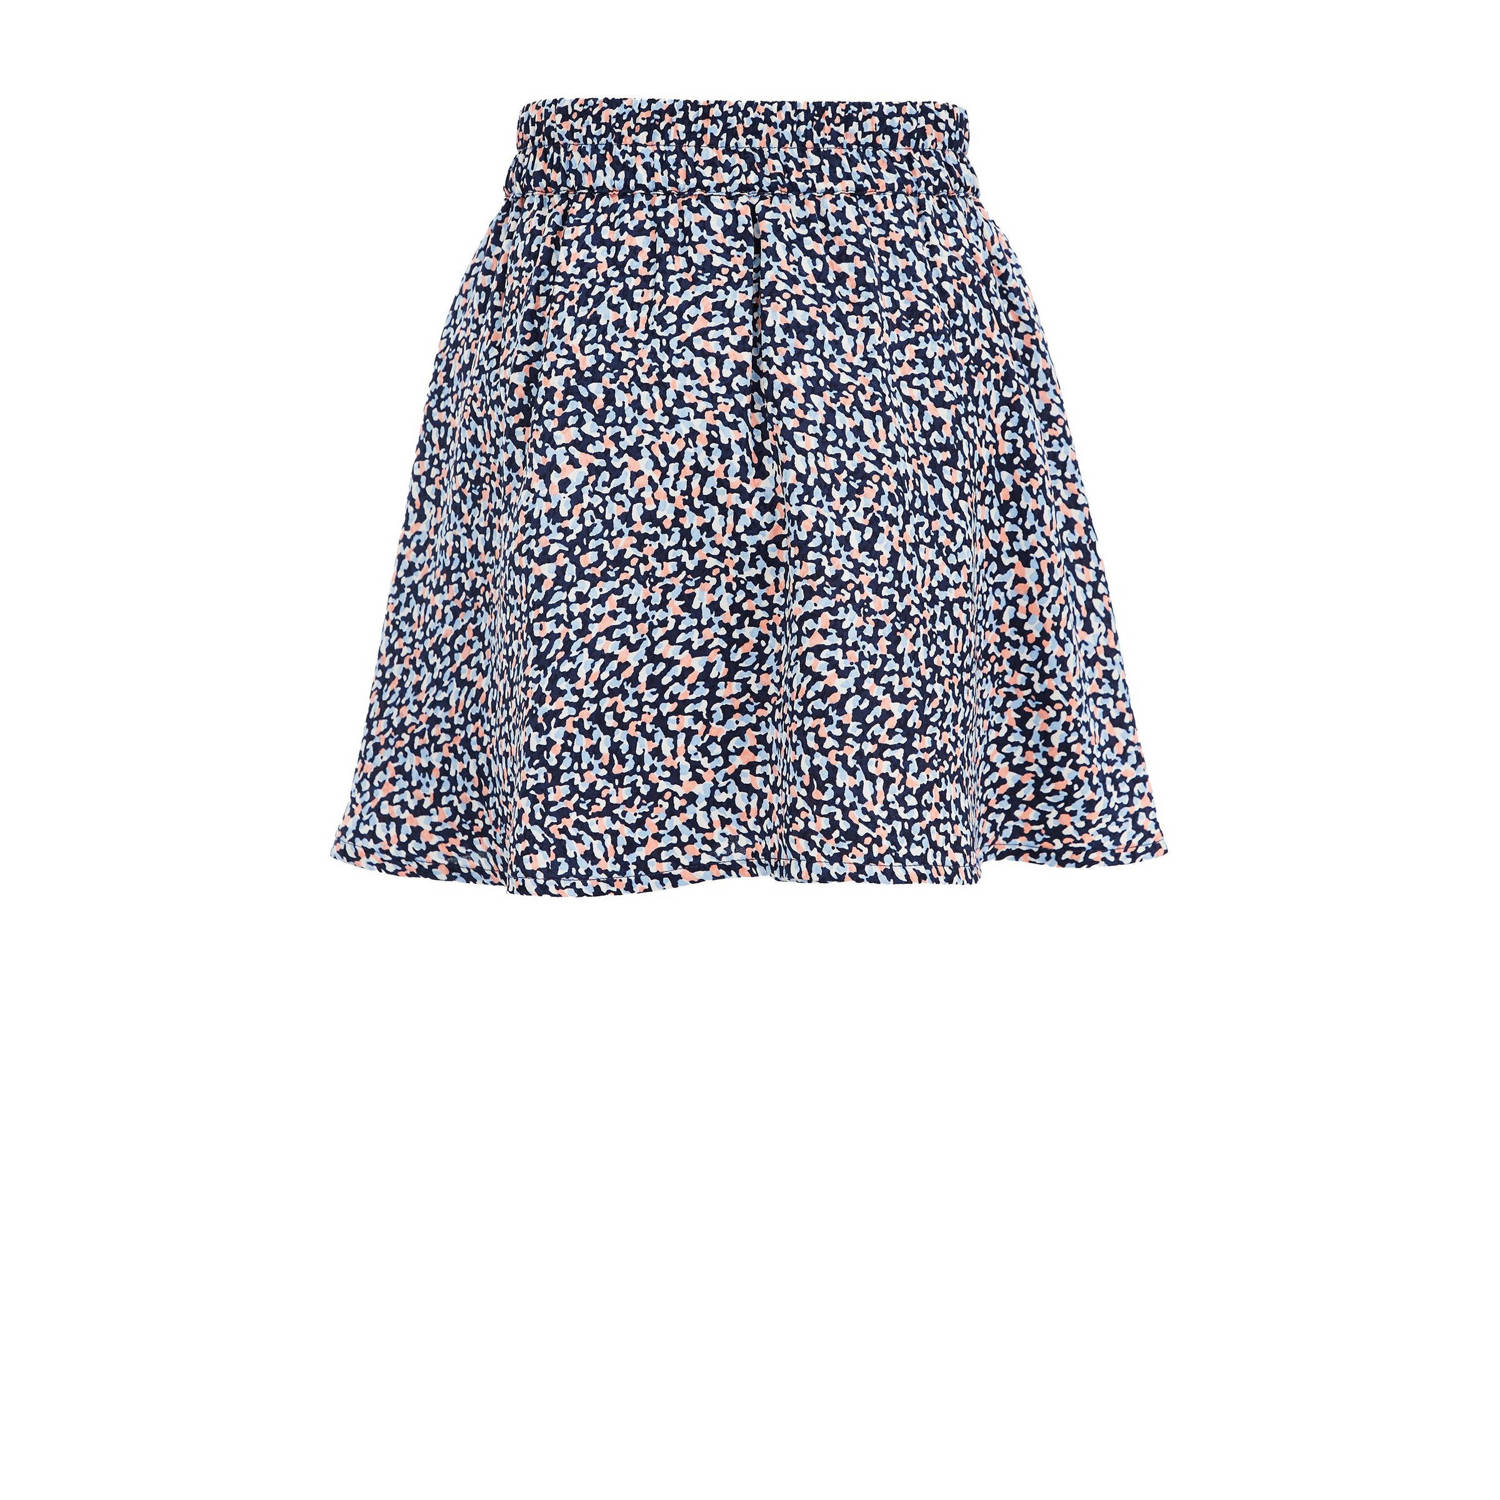 WE Fashion rok met all over print donkerblauw